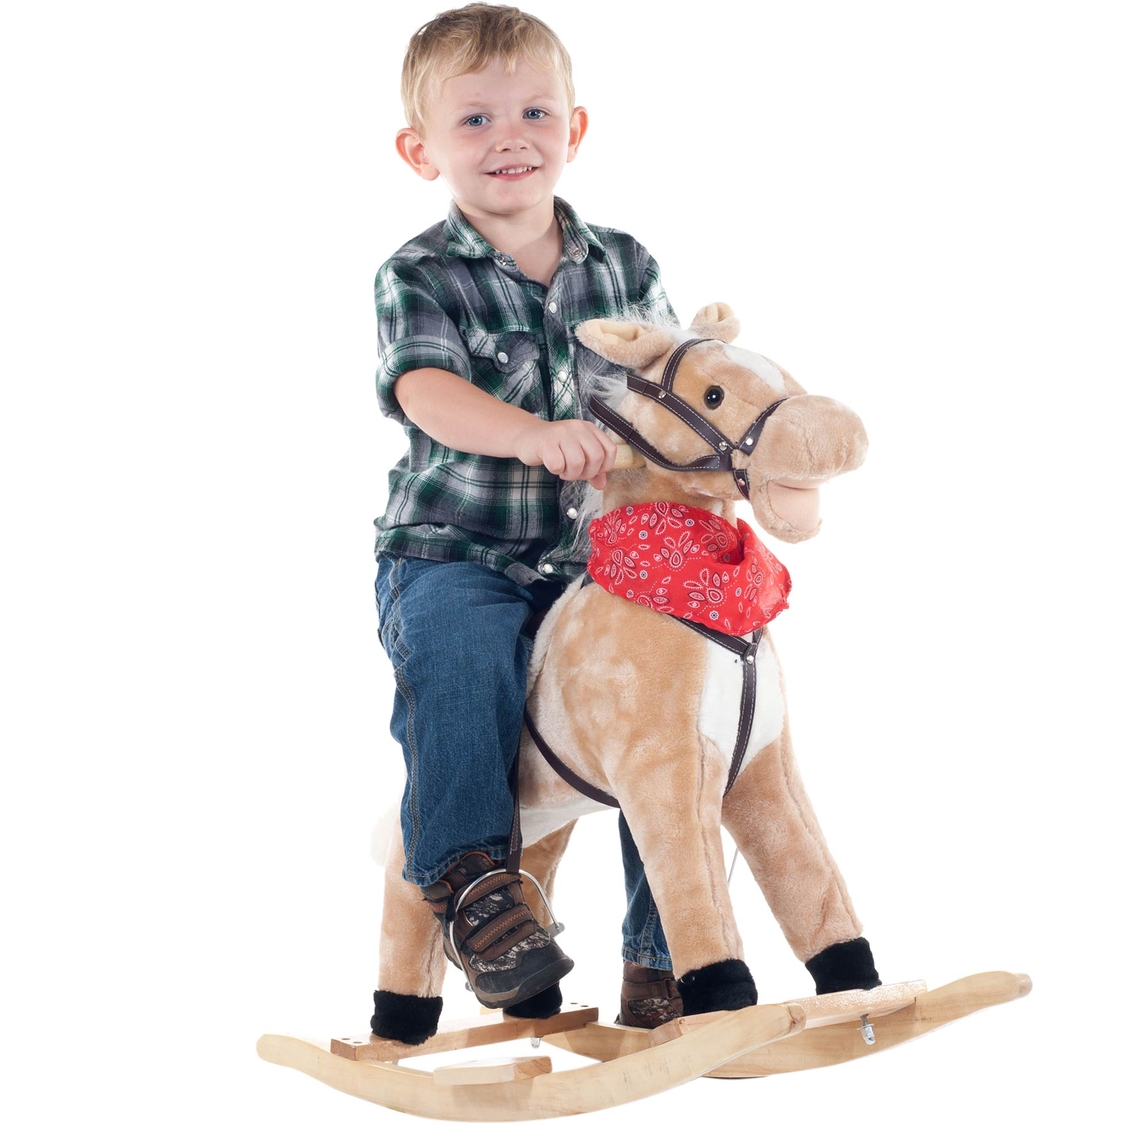 Happy Trails Dusty the Rocking Horse - Image 2 of 2